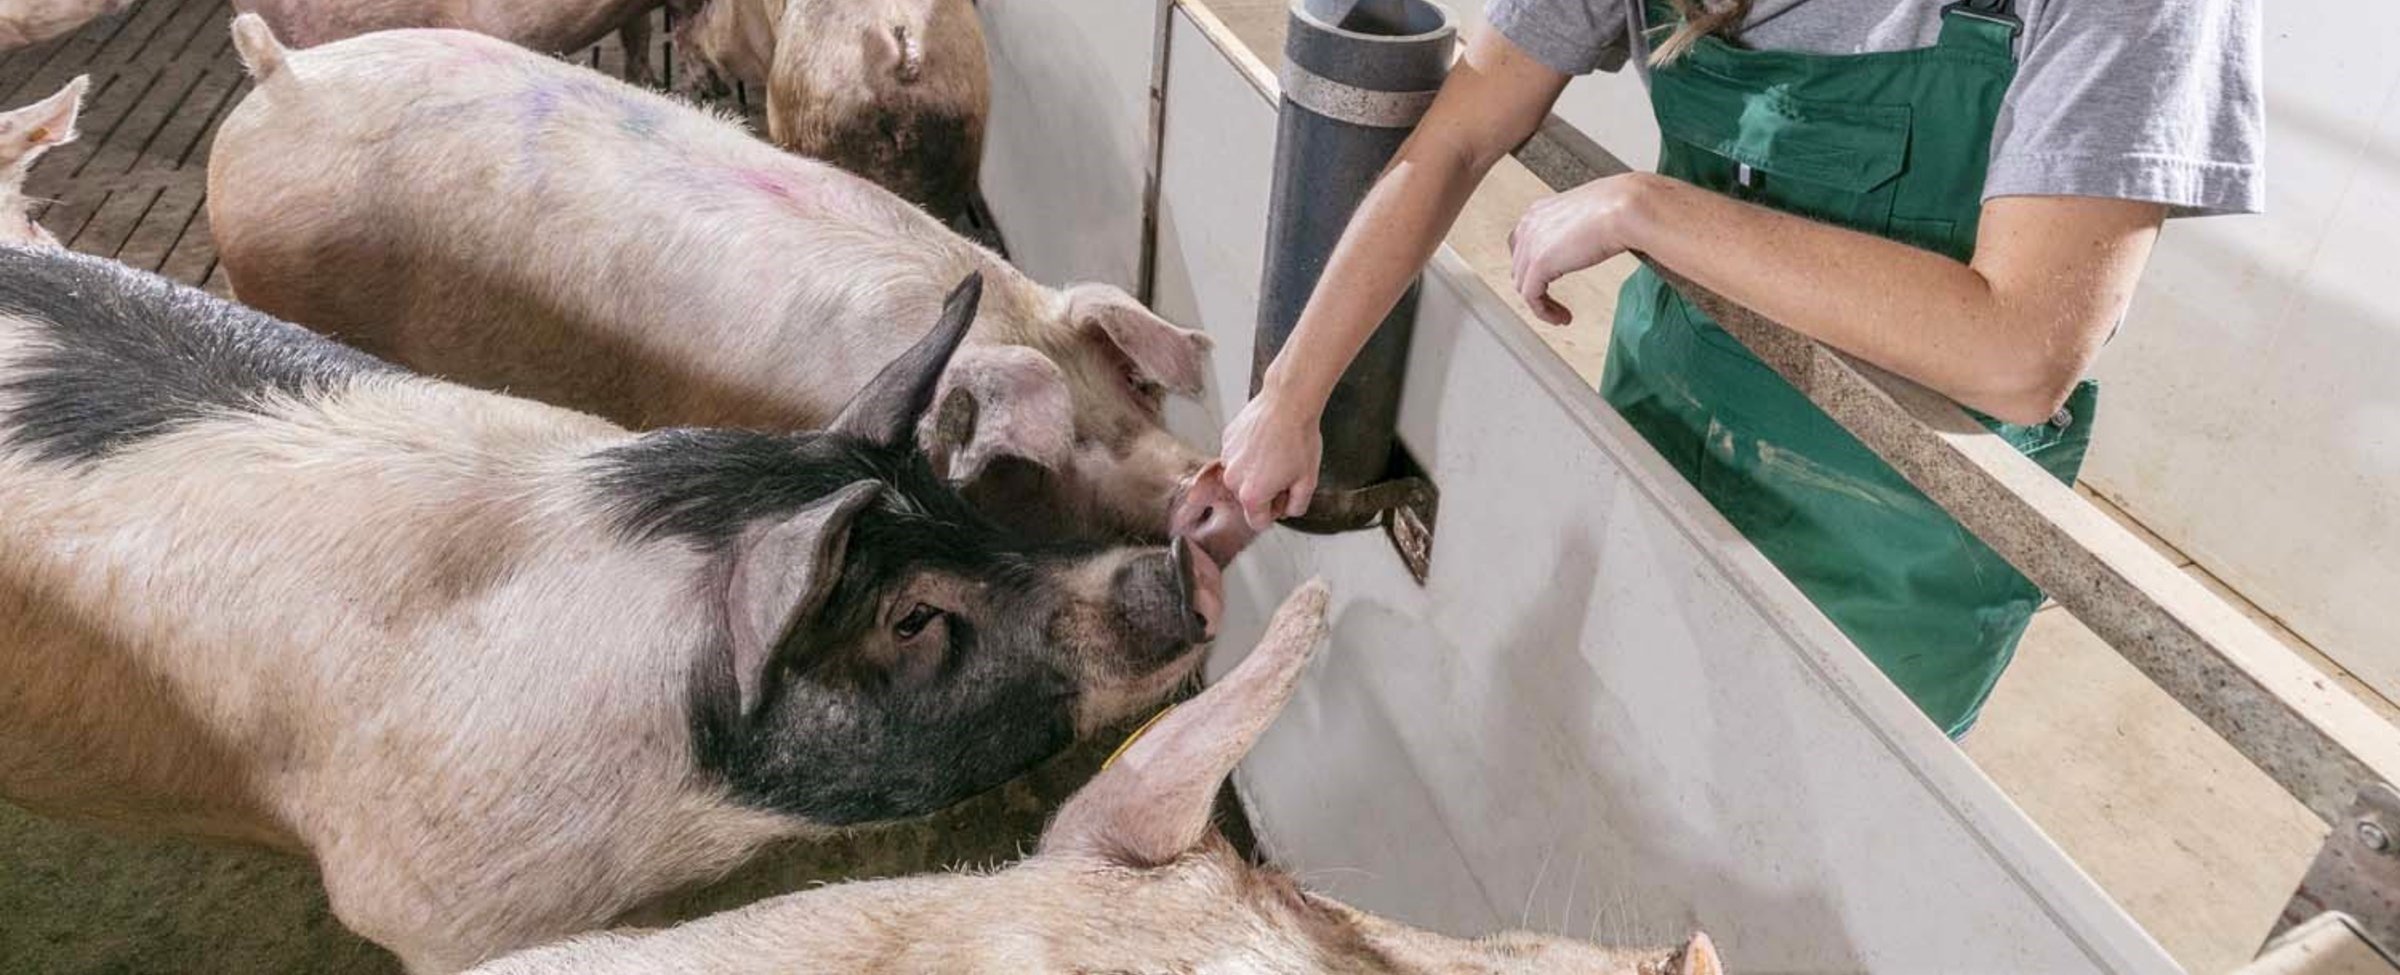 Reducing antimicrobial resistance in sows